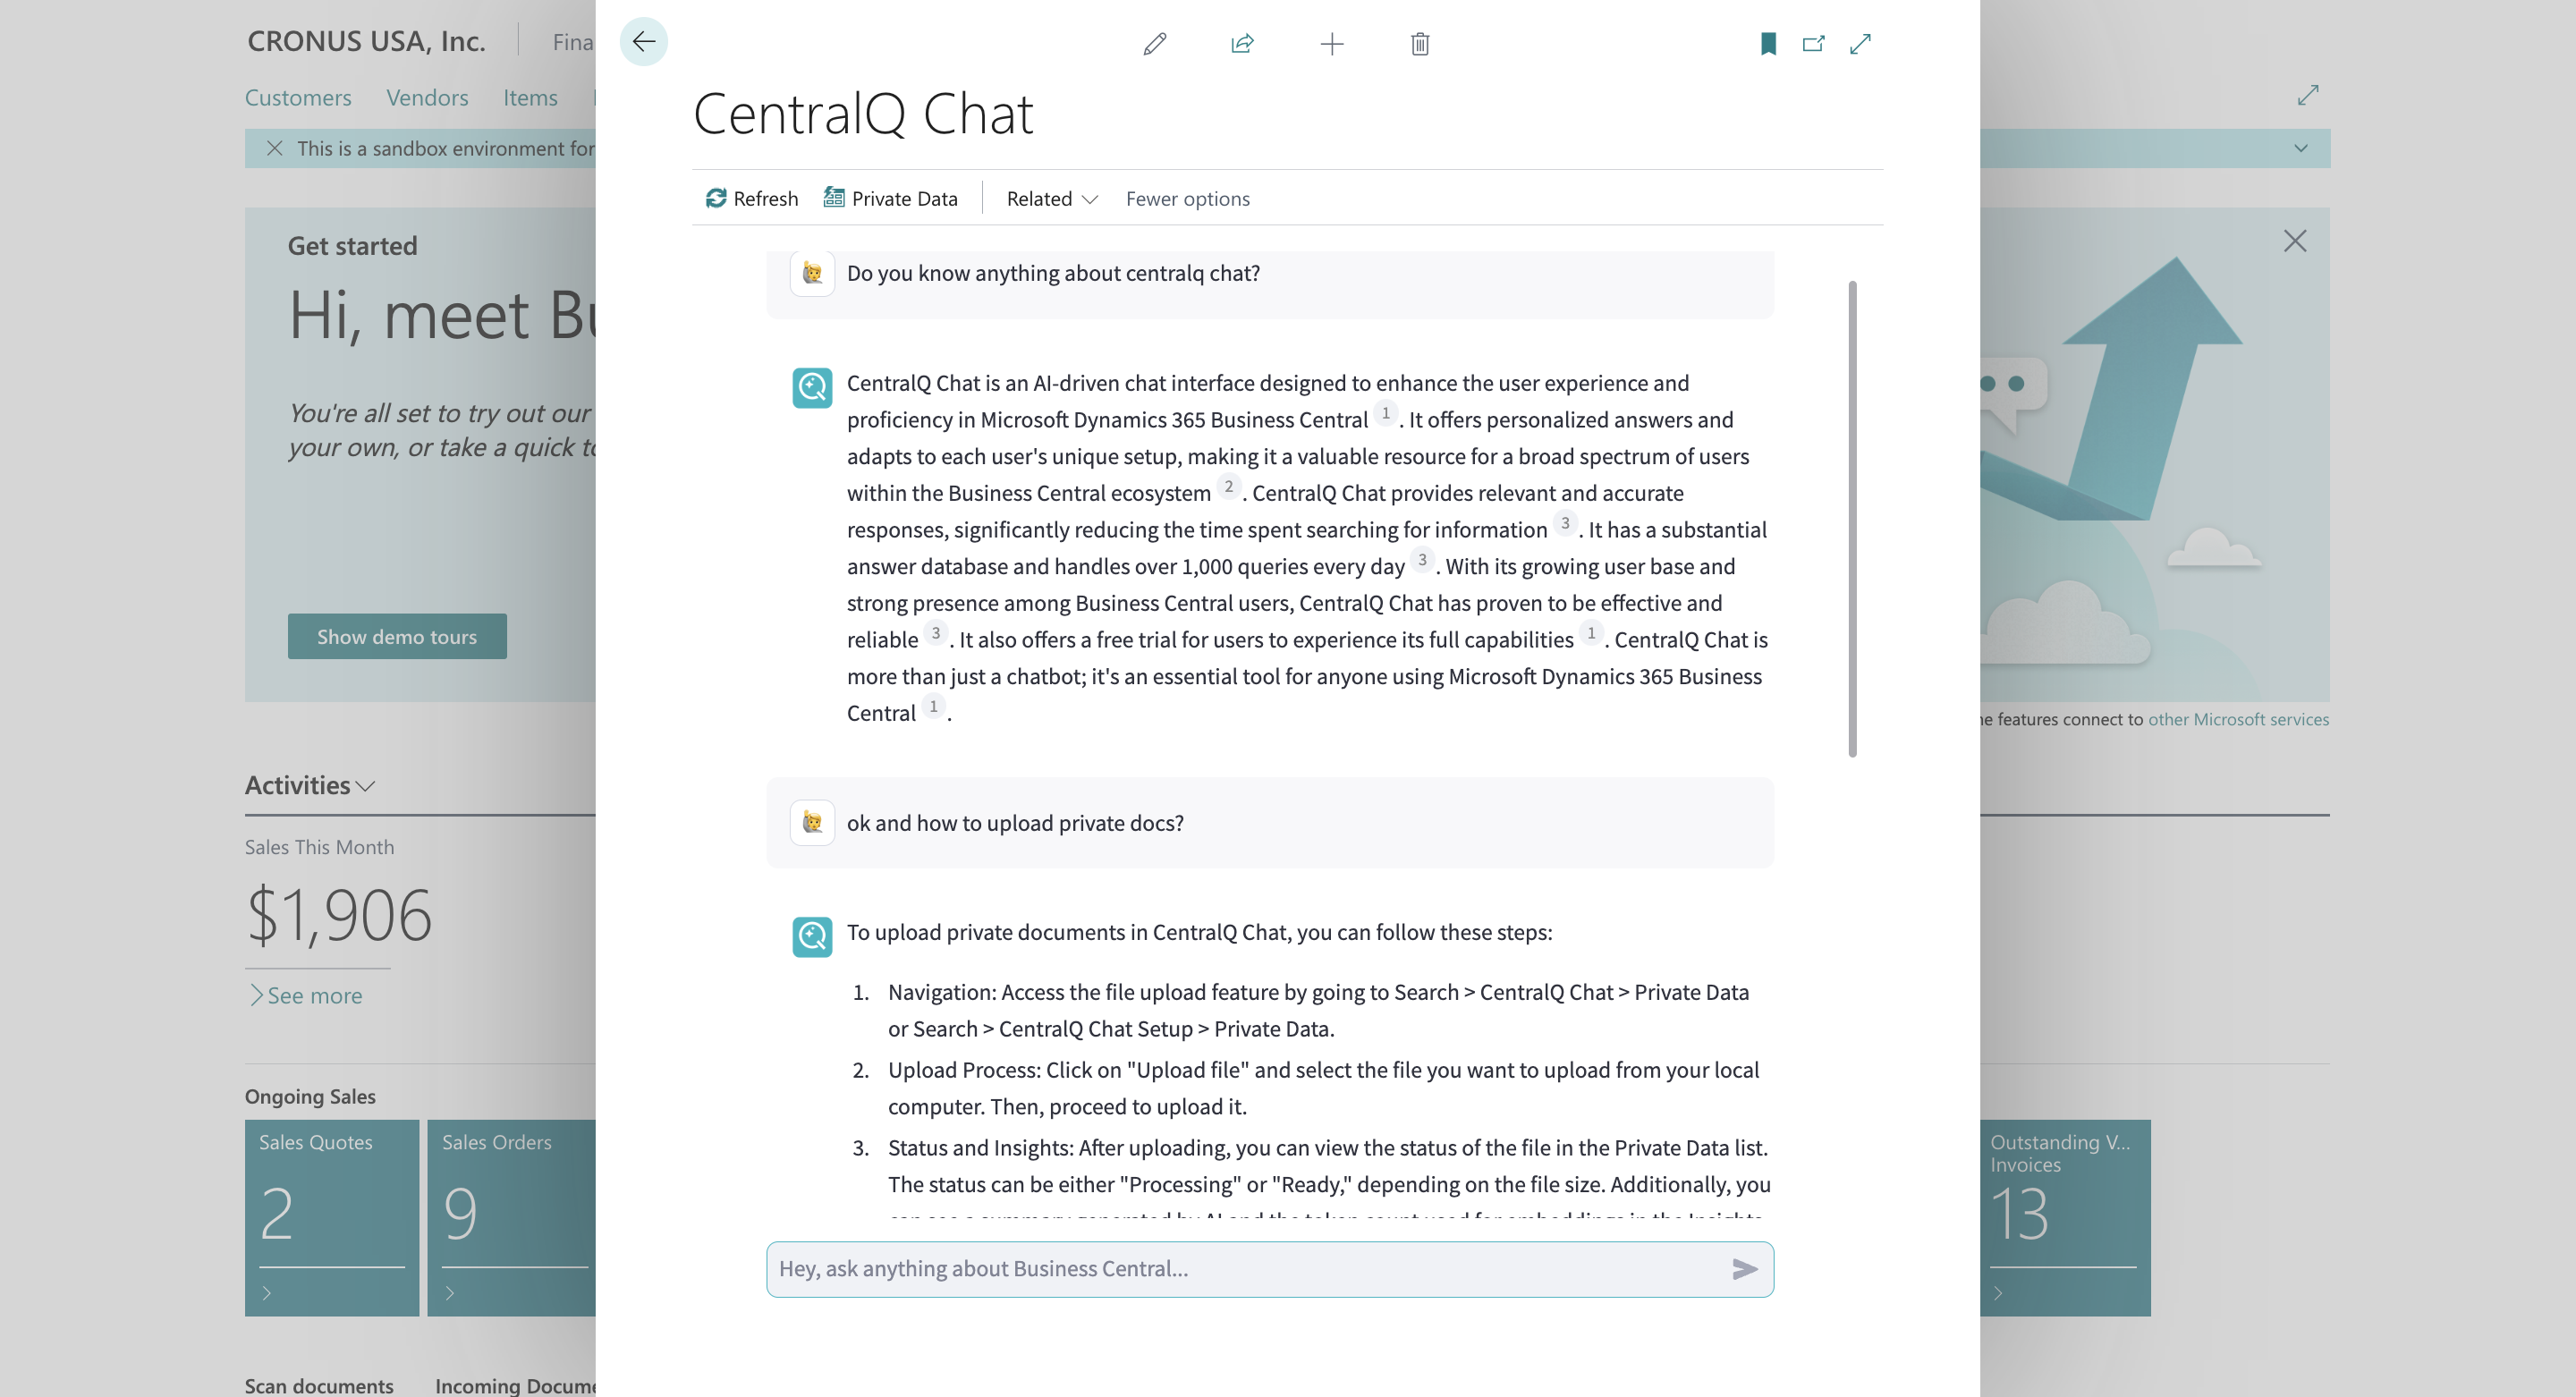 CentralQ Chat Follow-up